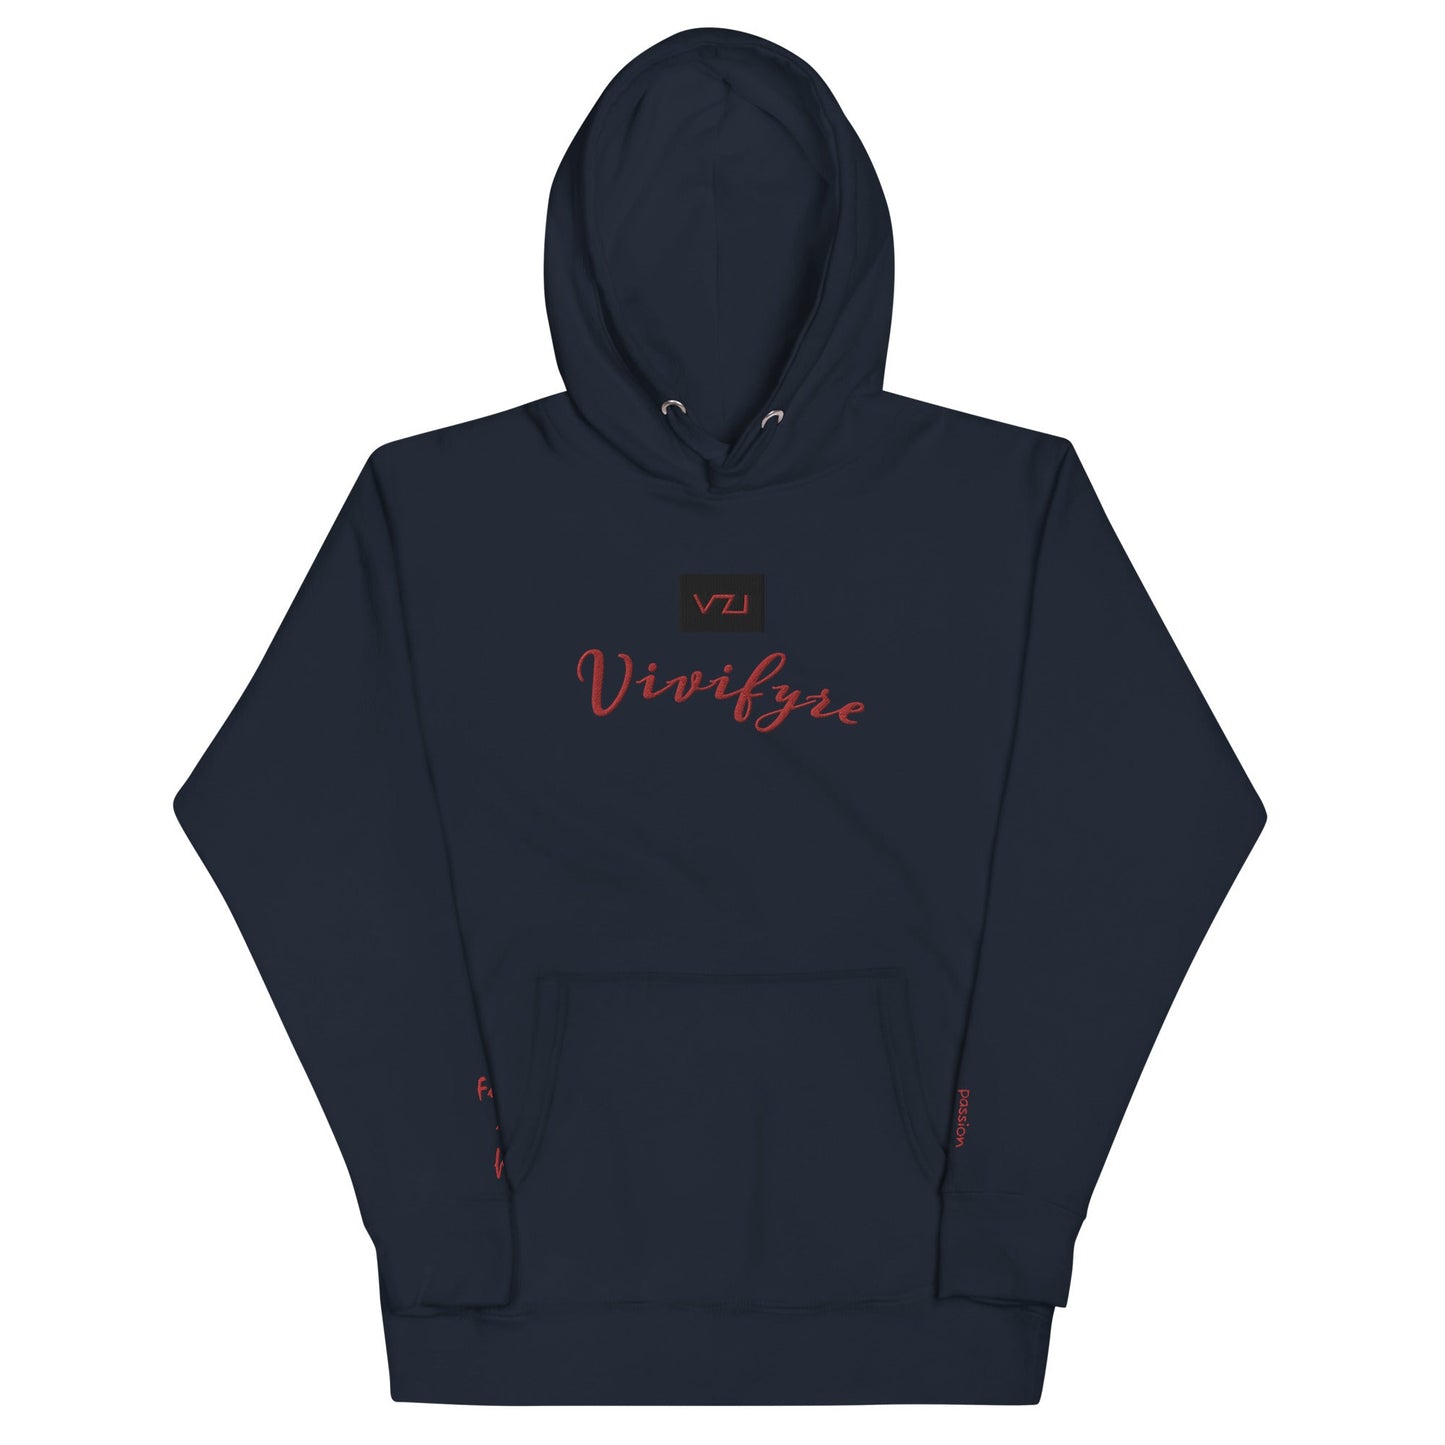 Vivifyre: Women's Hoodie - Cotton Heritage: Full Of Fire - Vazzari Couture